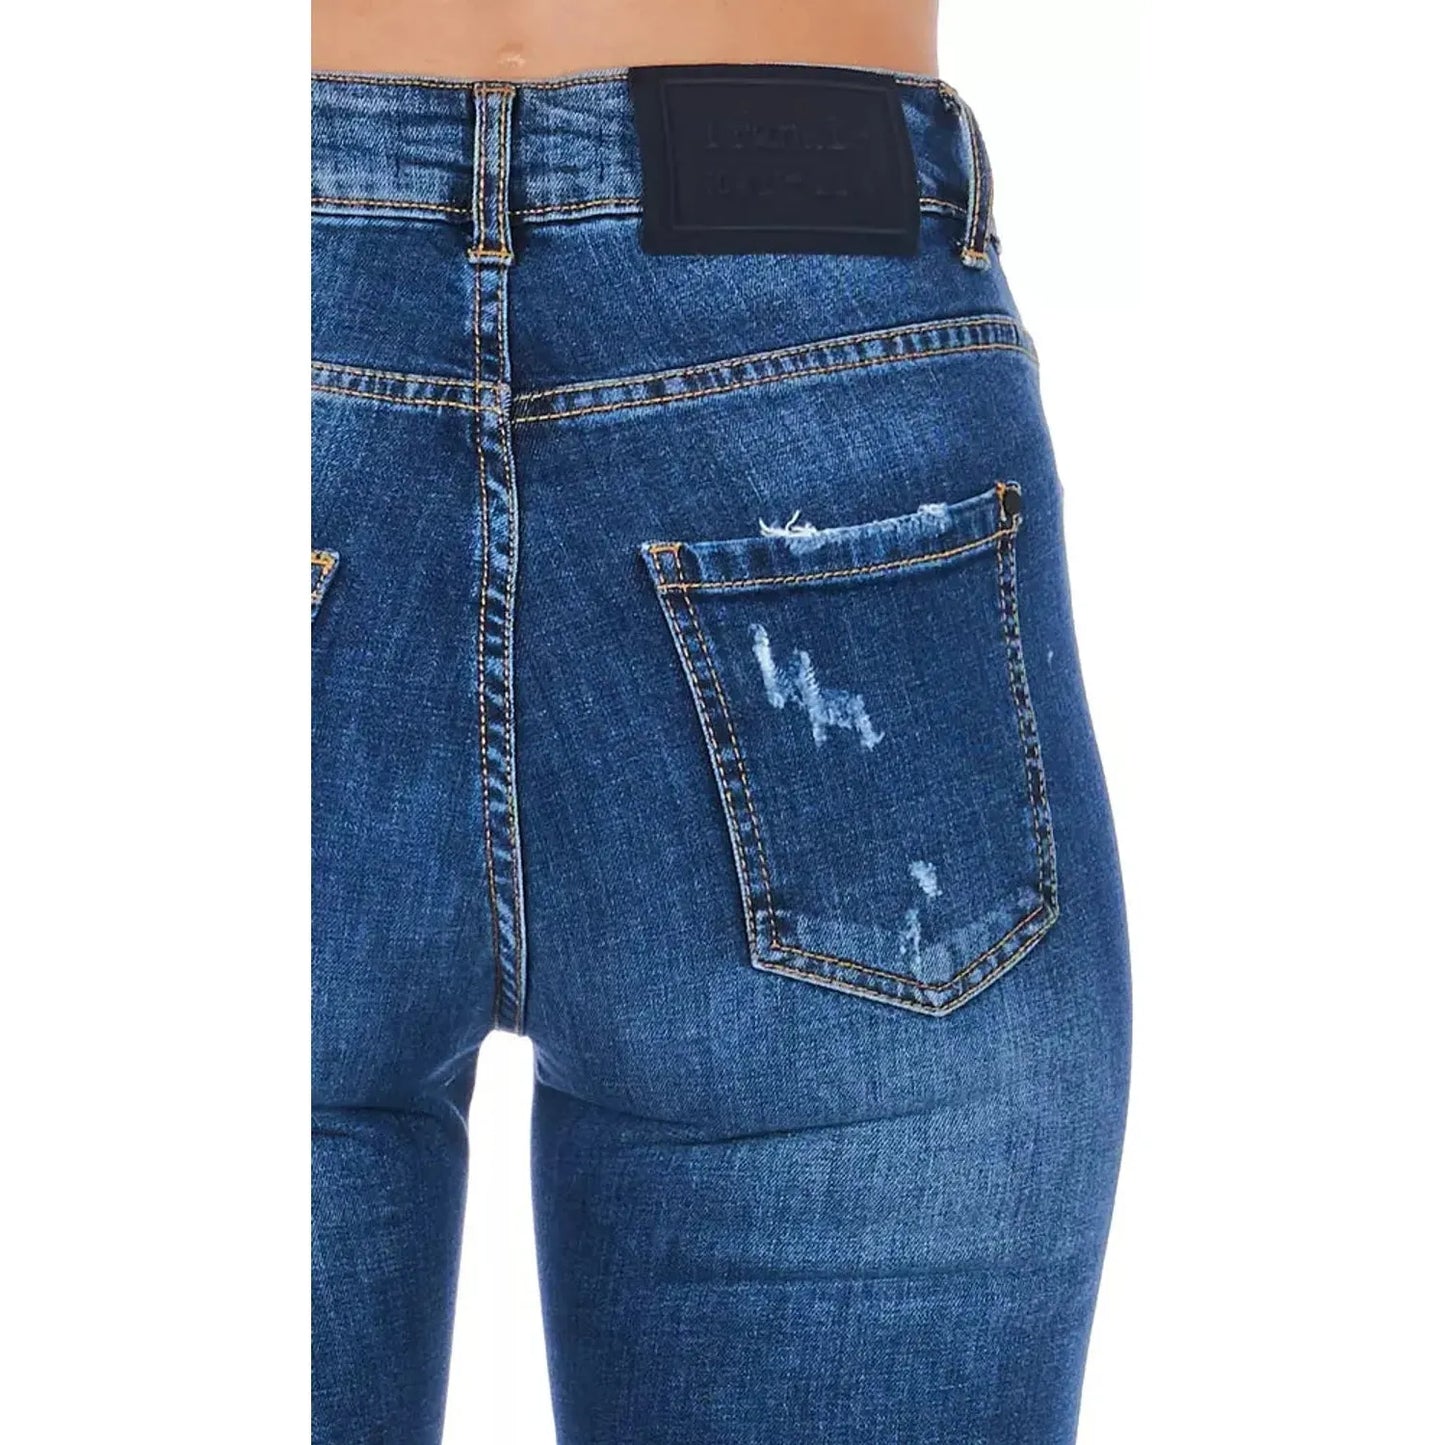 Frankie Morello Chic Worn Wash Denim Jeans for Sophisticated Style blue-jeans-pant-5 stock_product_image_21771_318584715-25-8d70b5ee-cf2.webp